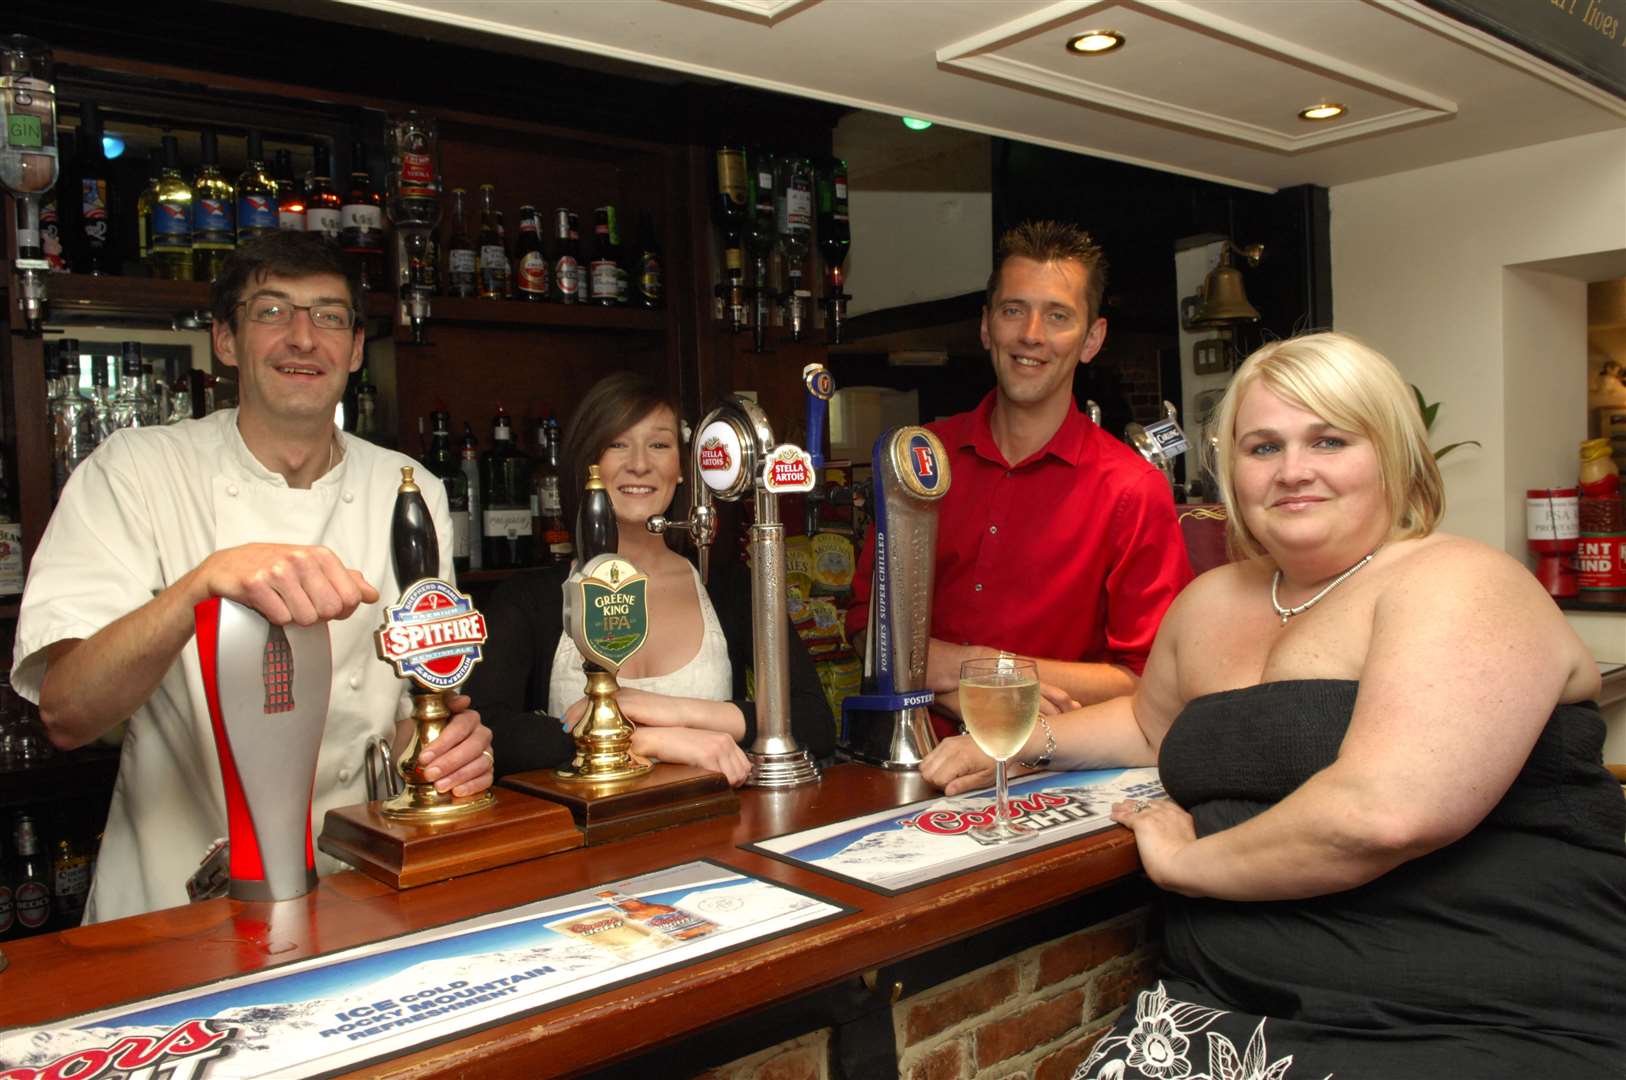 Tony Suckling, Briony Morgan, Danny Moors and Debbie Doyle in 2010 after being named pub of the year. Picture: Martin Apps